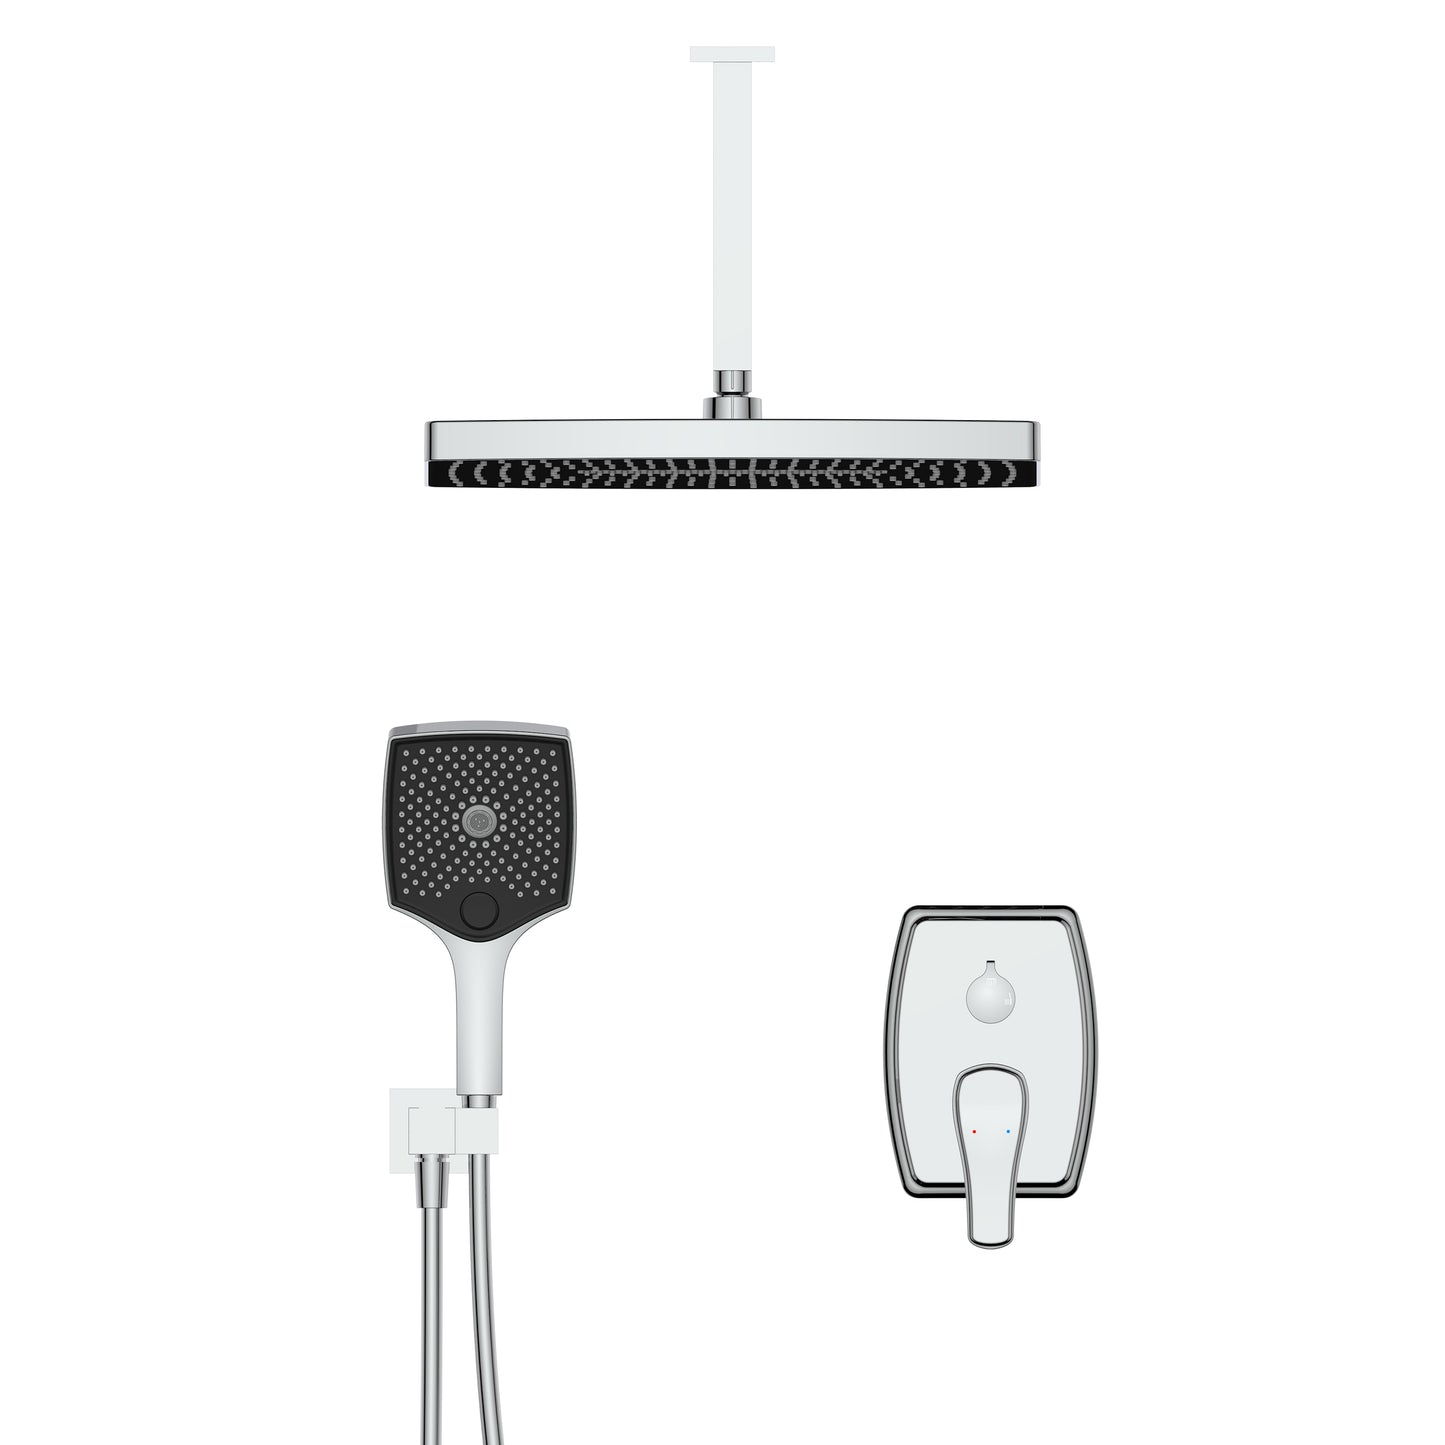 Shower System, Ultra-thin Wall Mounted Shower Faucet Set for Bathroom with High Pressure Big Size Stainless Steel Rain Shower head Handheld Shower Set, 2 Way Pressure Balance Shower Valve Kit,Chrome